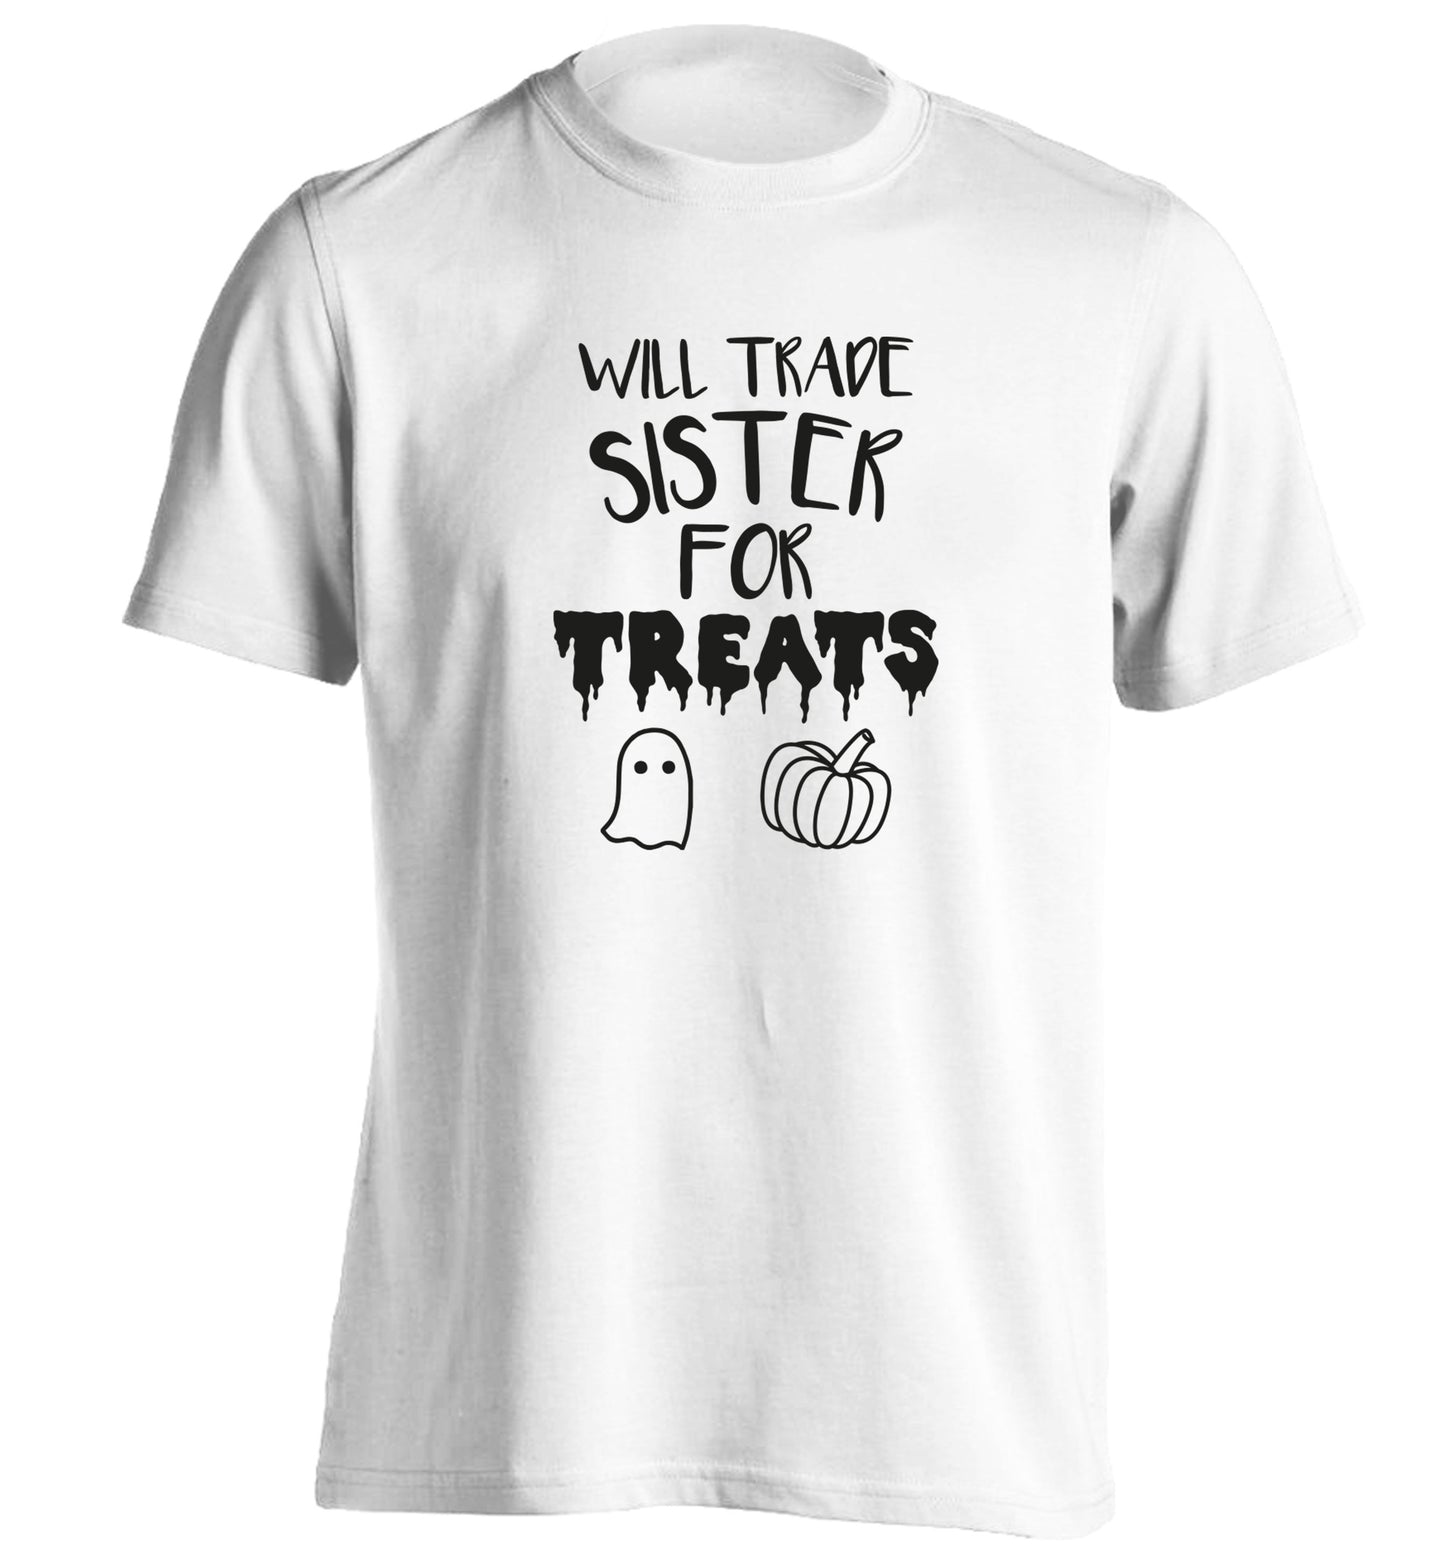 Will trade sister for treats adults unisex white Tshirt 2XL